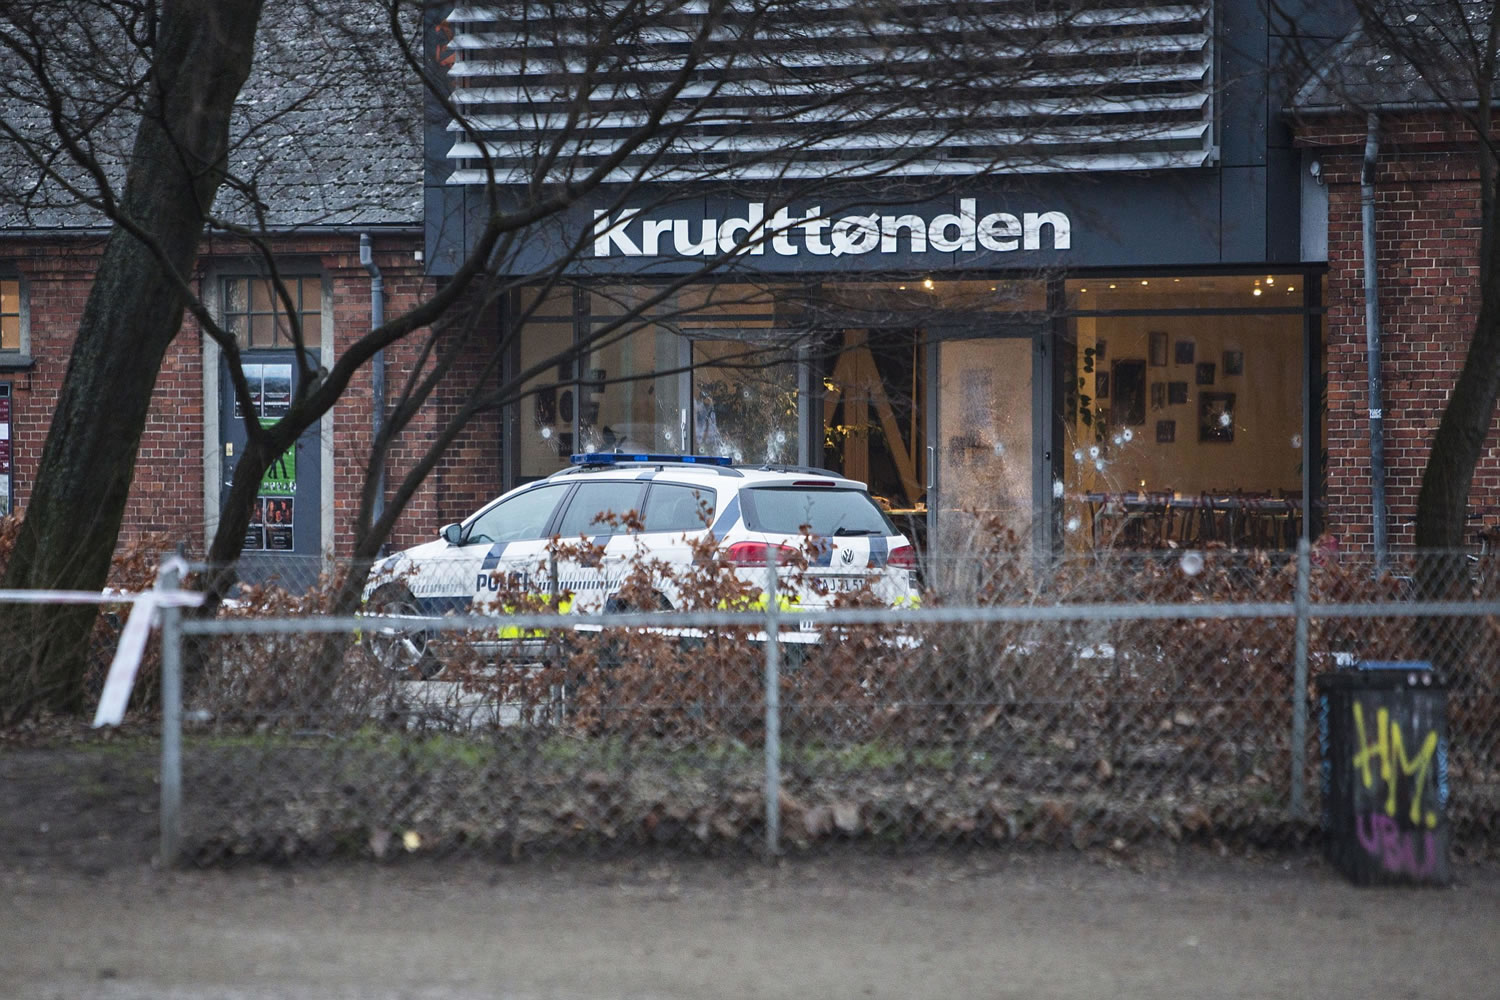 The scene outside the Copenhagen cafe, with bullet-marked window, where a gunman opened fire Saturday in what is seen as a likely terror attack against a free speech event organized by an artist who had caricatured the Prophet Muhammad.